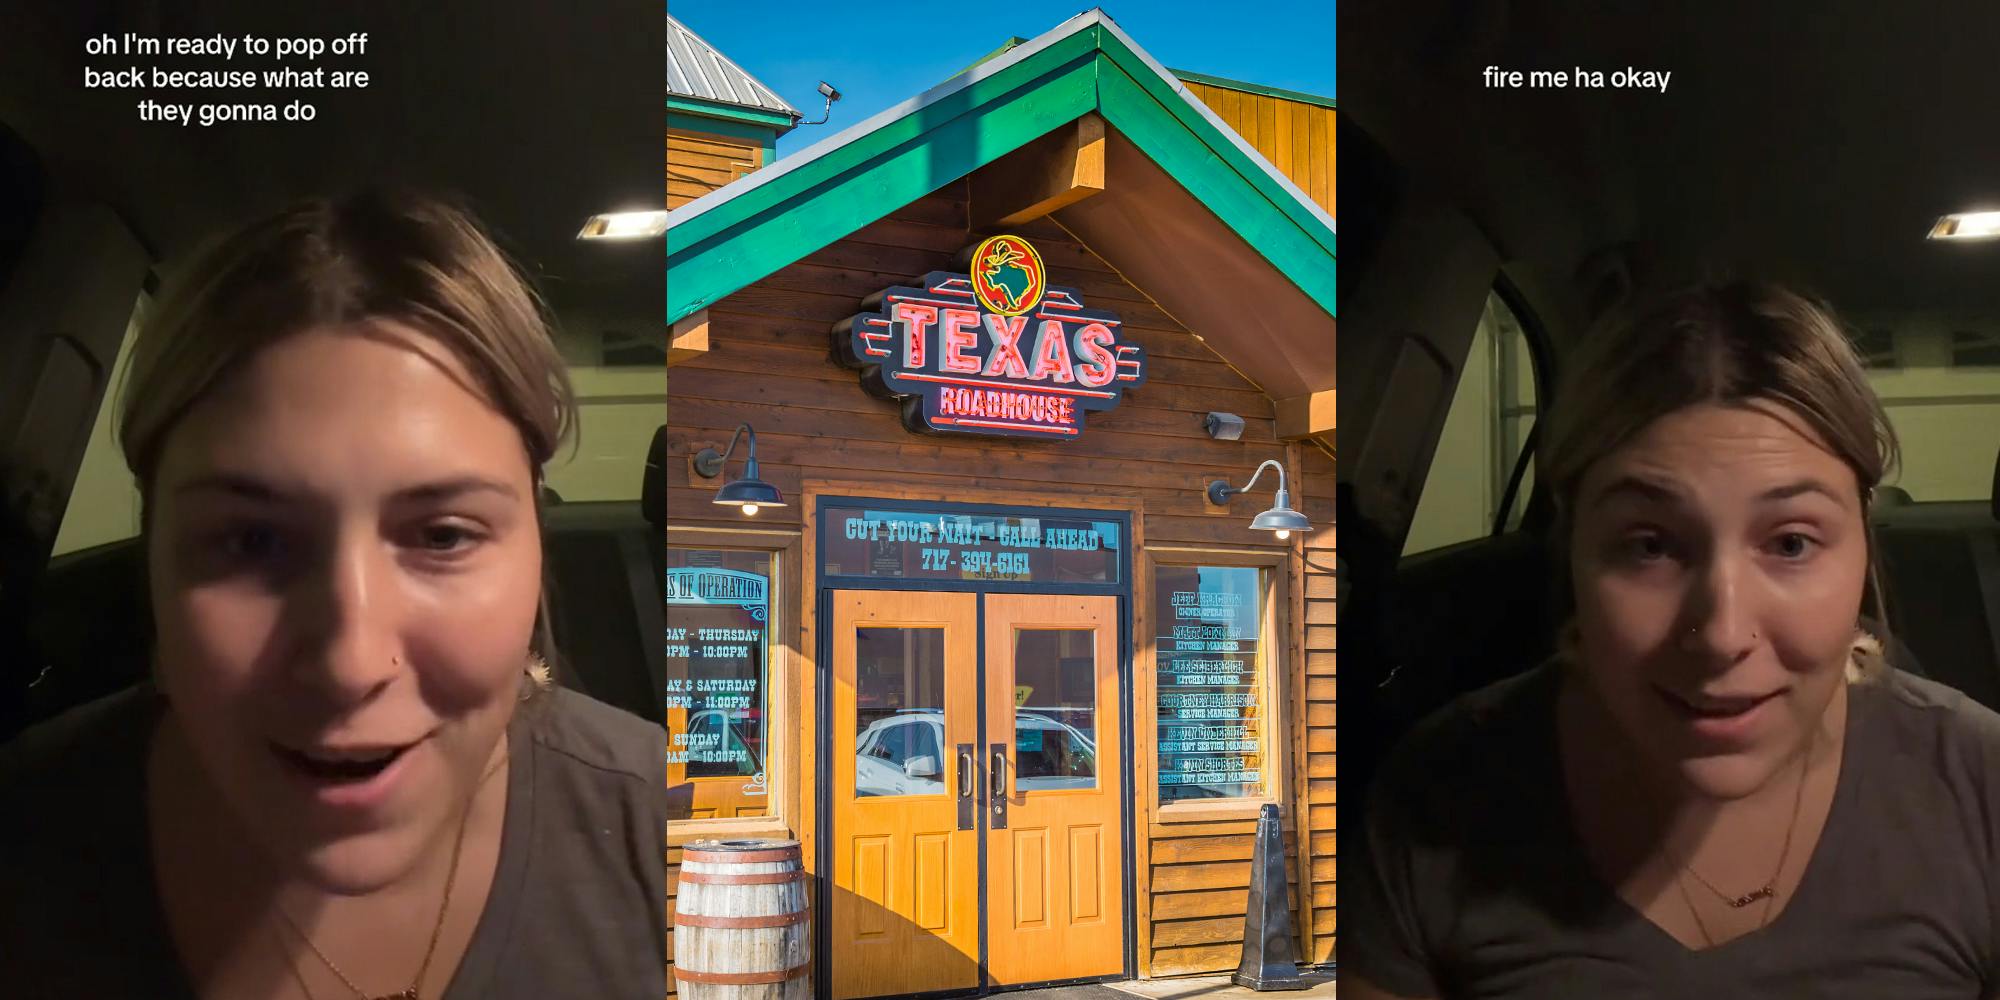 former Texas Roadhouse server speaking in car with caption "oh I'm ready to pop off back because what are they gonna do" (l) Texas Roadhouse entrance with sign (c) former Texas Roadhouse server speaking in car with caption "fire me ha okay" (r)